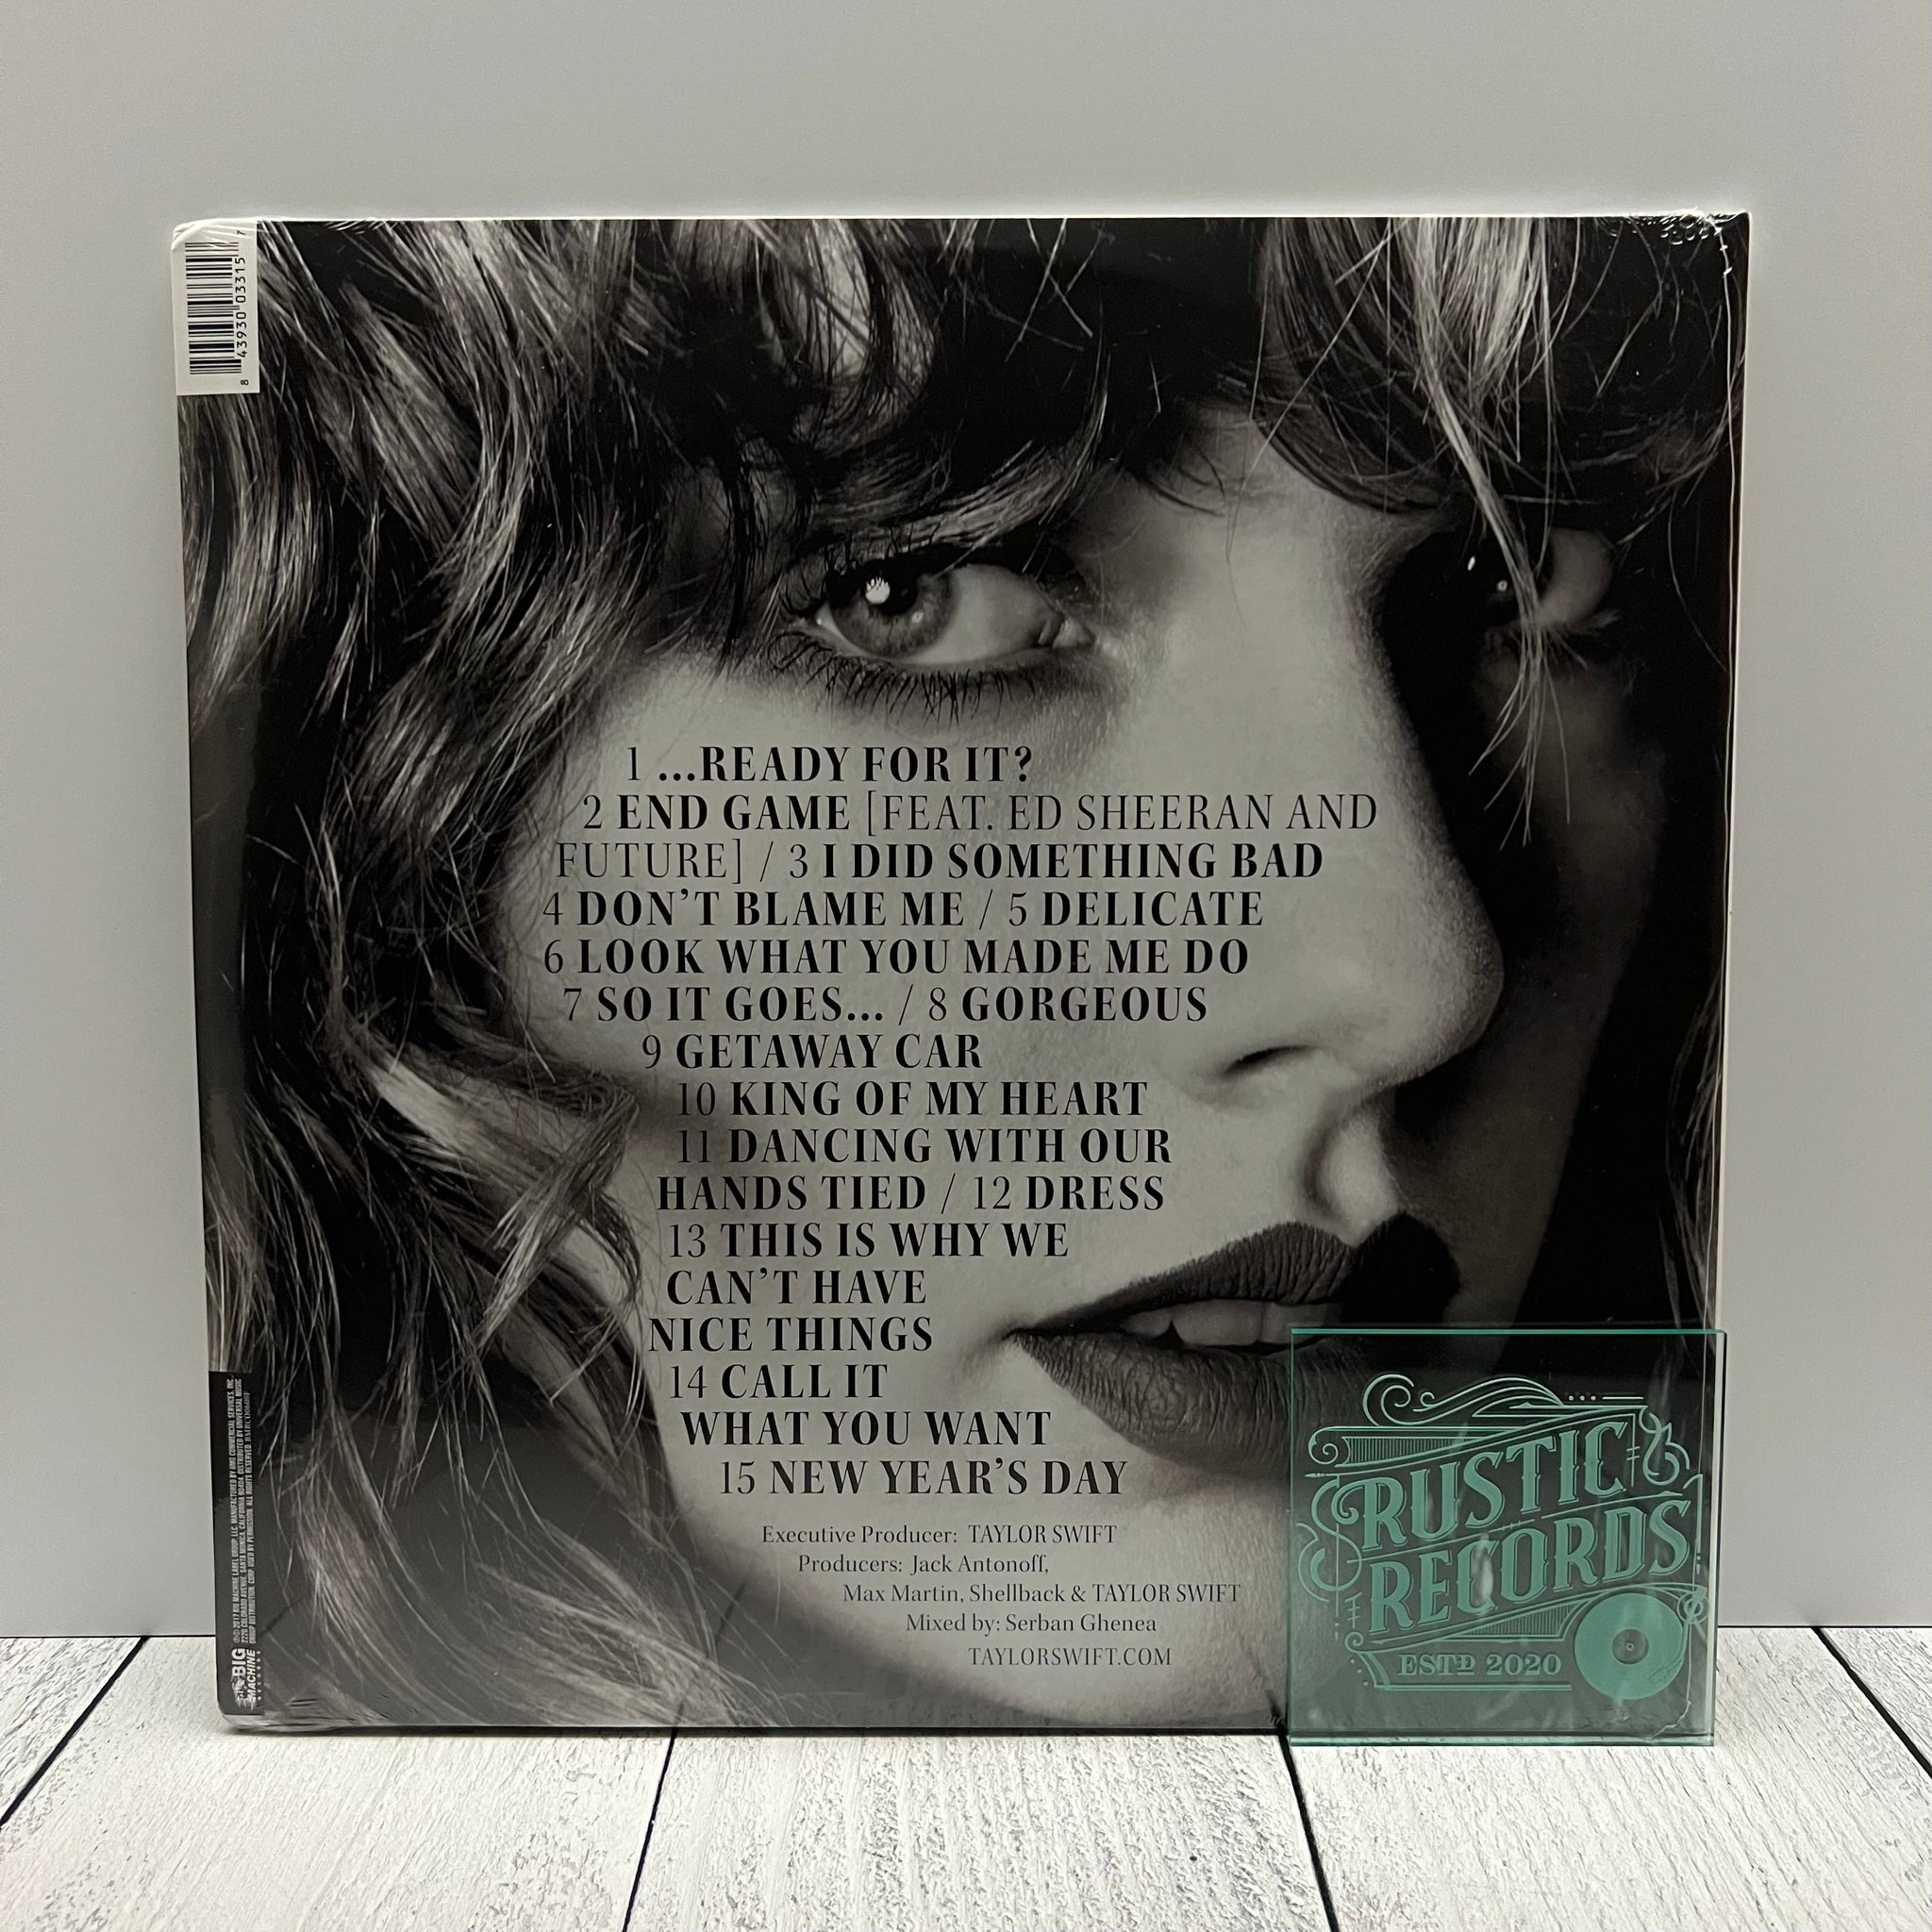 Taylor Swift - Reputation (Picture Disc) (LIMIT 2 PER CUSTOMER)